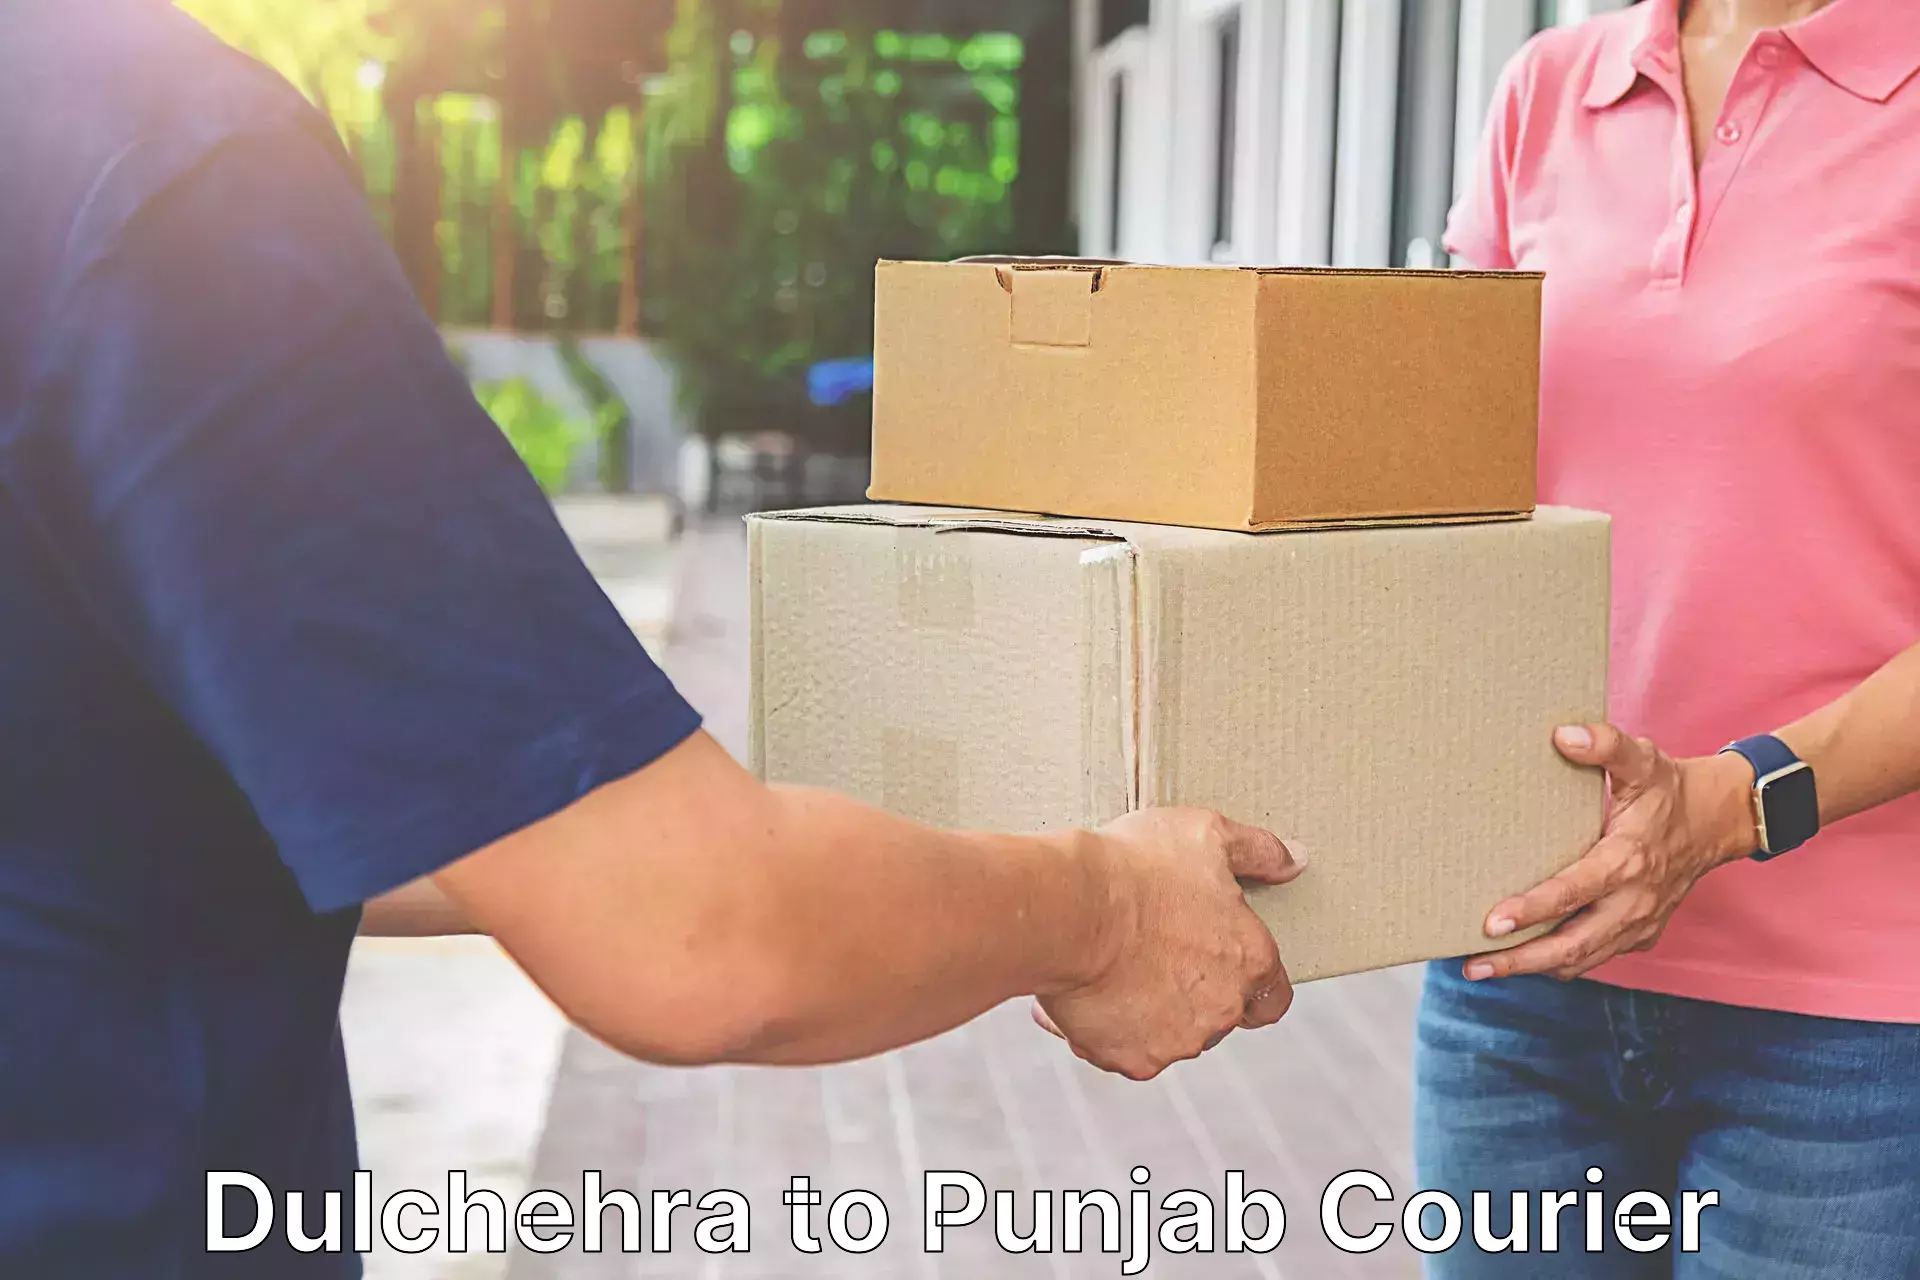 Personal courier services Dulchehra to Pathankot